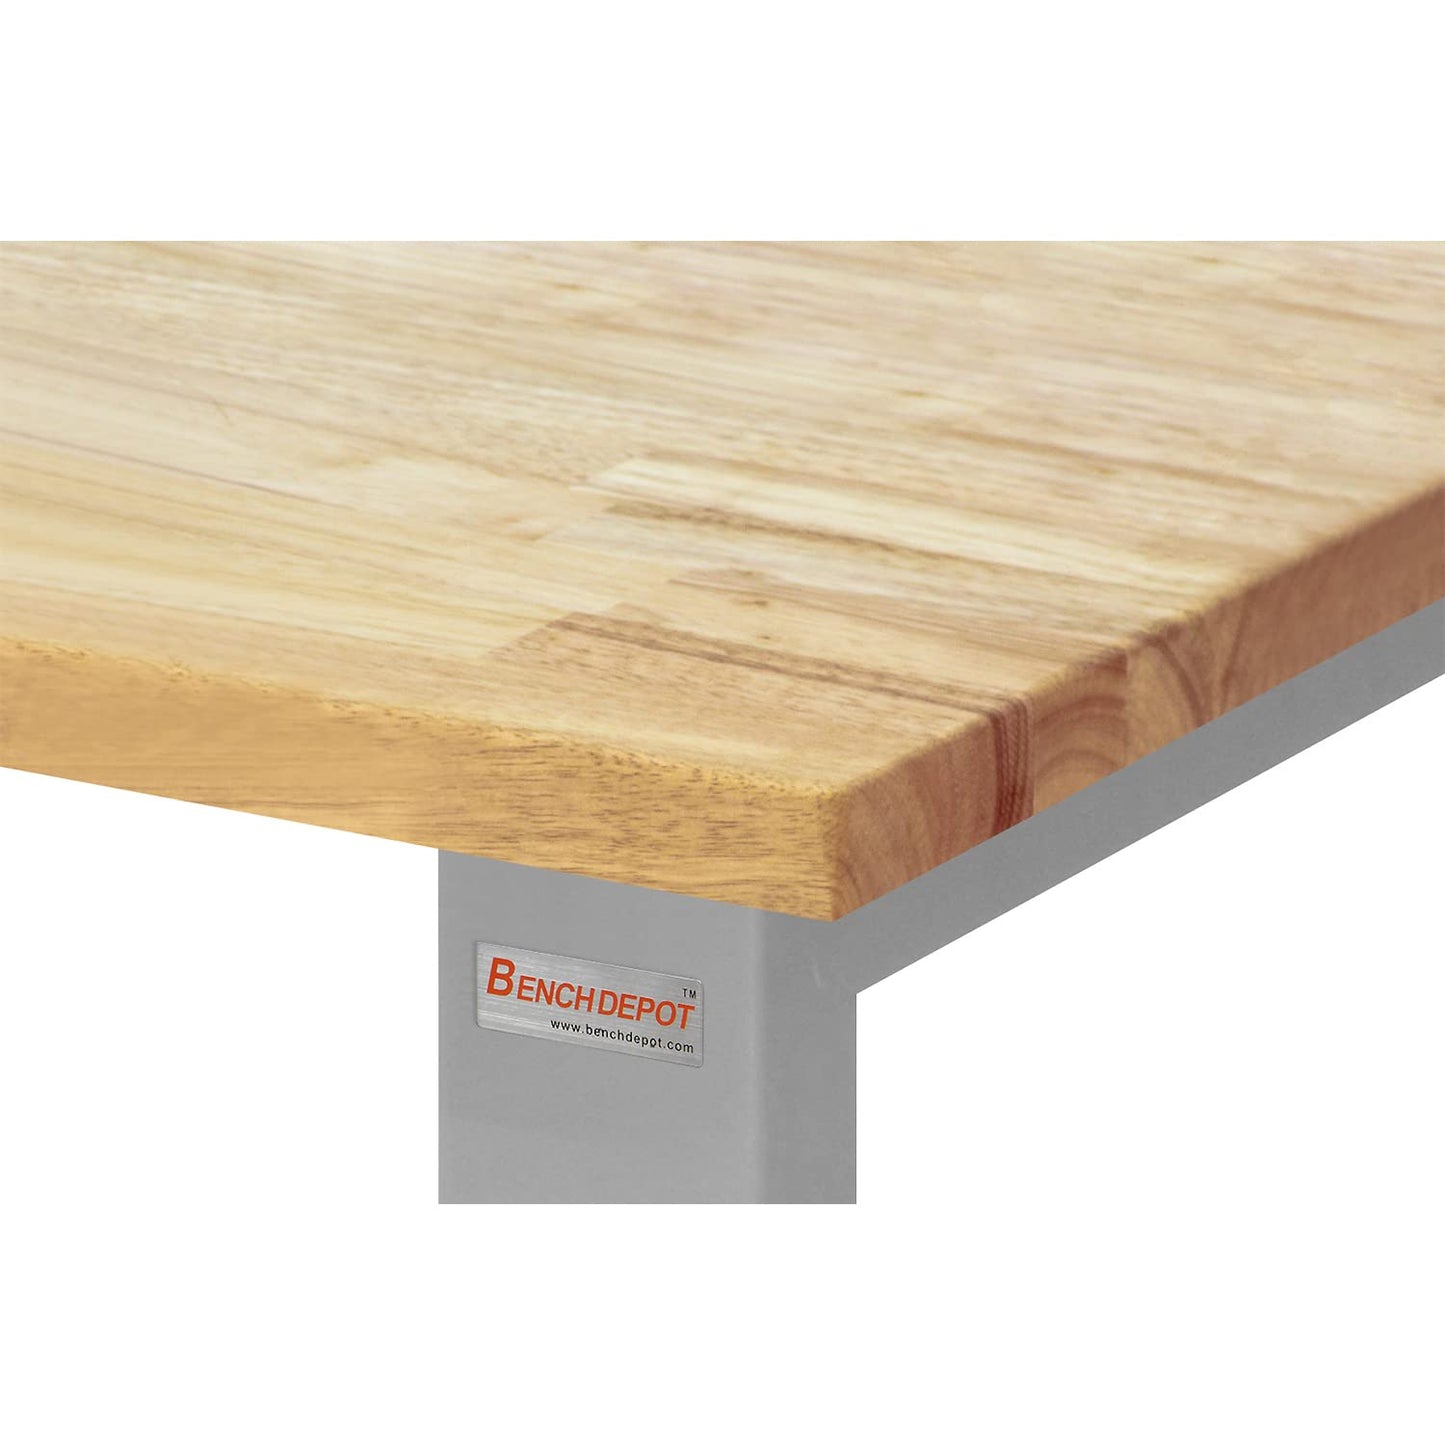 Table & Workbench: 1" Thick Solid Oiled Wood Butcher Block Top, Height Adjustable - 24" D x 48" L x 30" - 36" H - by BenchPro